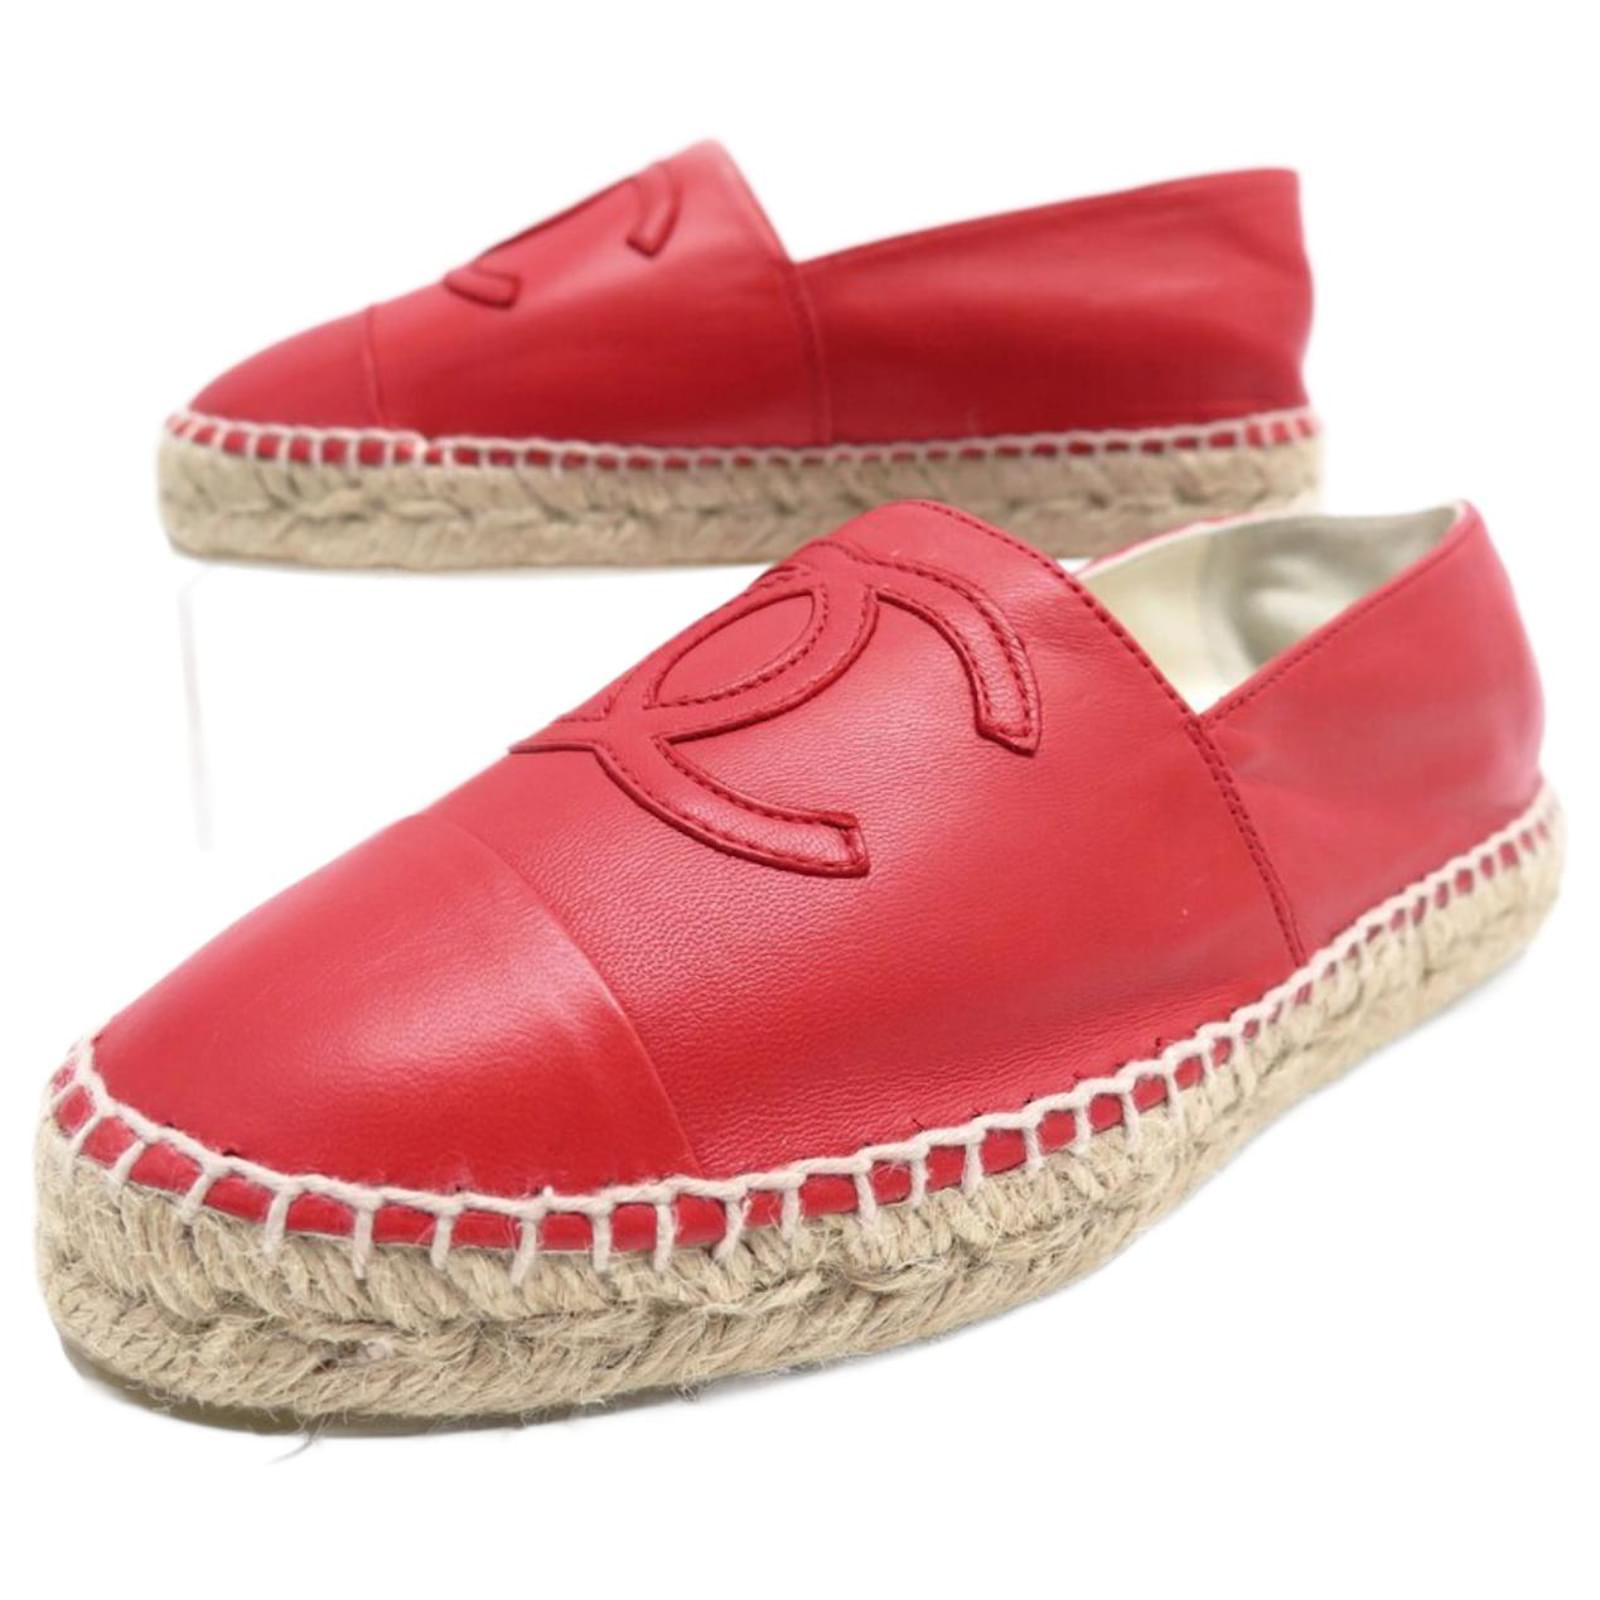 NEW CHANEL LOGO CC G SHOES29762 Espadrilles 35 LEATHER LEATHER